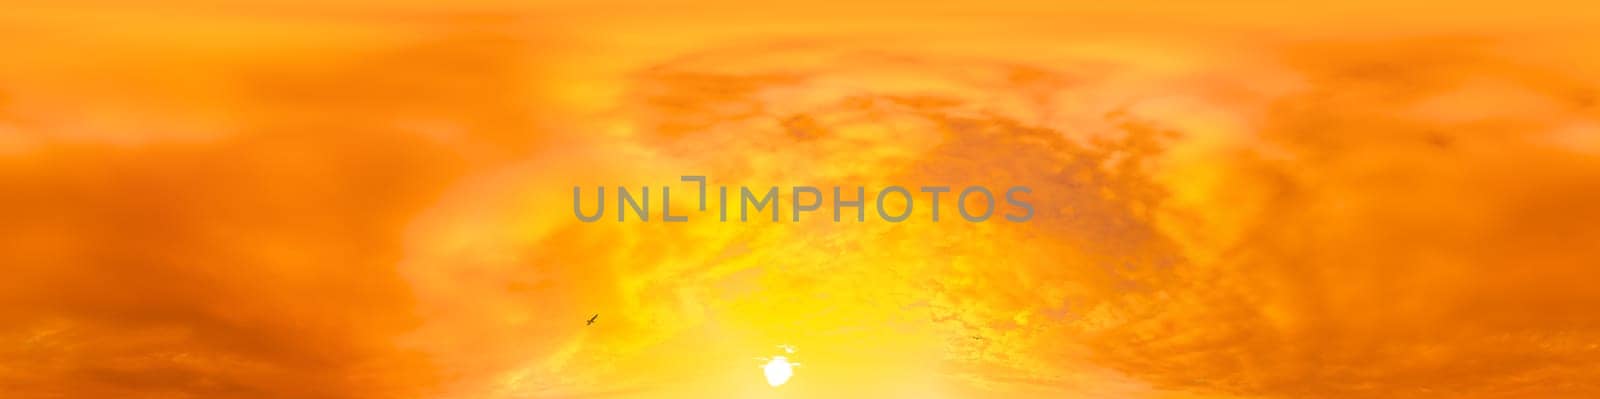 Sunset sky panorama with bright glowing pink Cumulus clouds. HDR 360 seamless spherical panorama. Full zenith or sky dome in 3D, sky replacement for aerial drone panoramas. Climate and weather change. by Matiunina